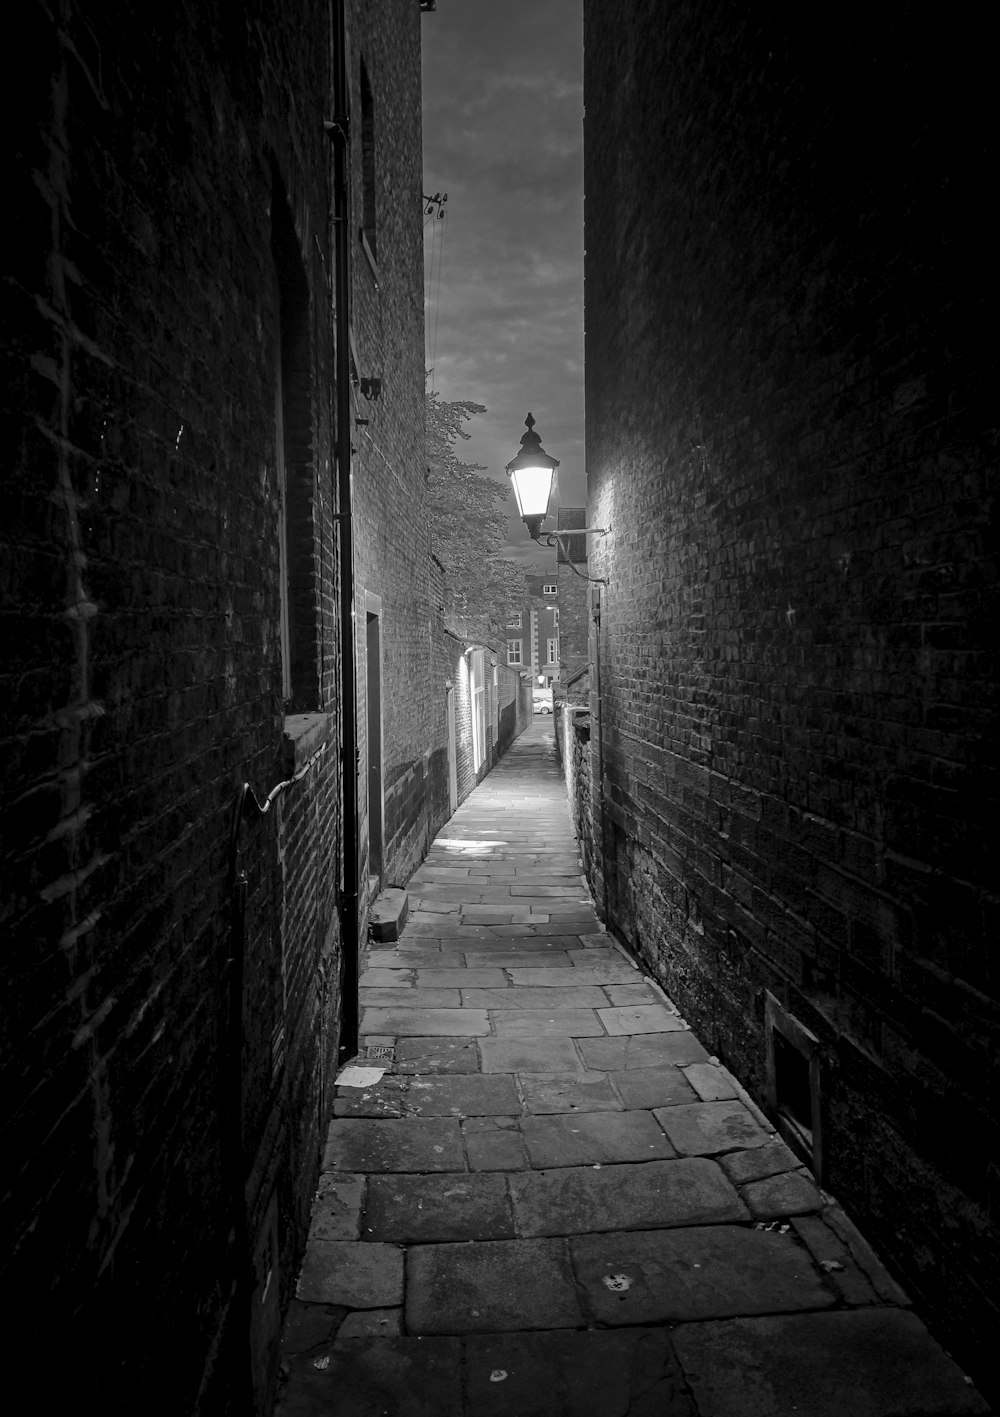 a dark alley way with a street lamp